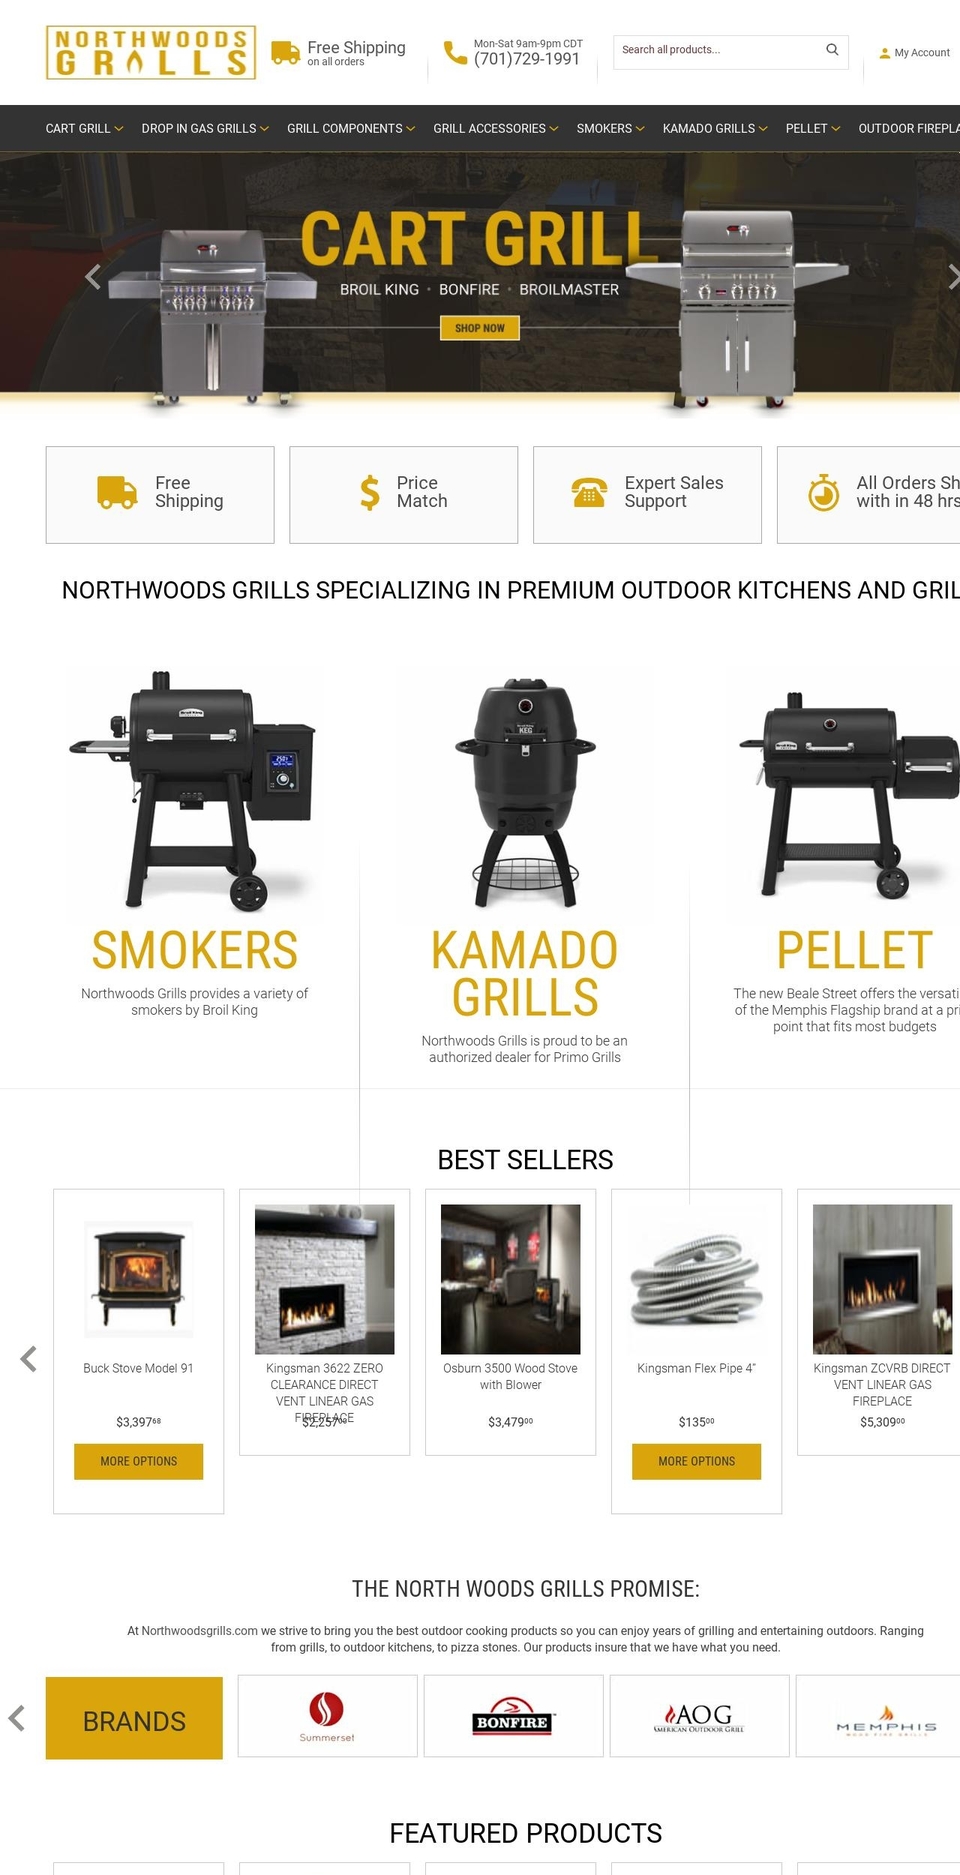 qeretail Shopify theme site example northwoodsgrills.com